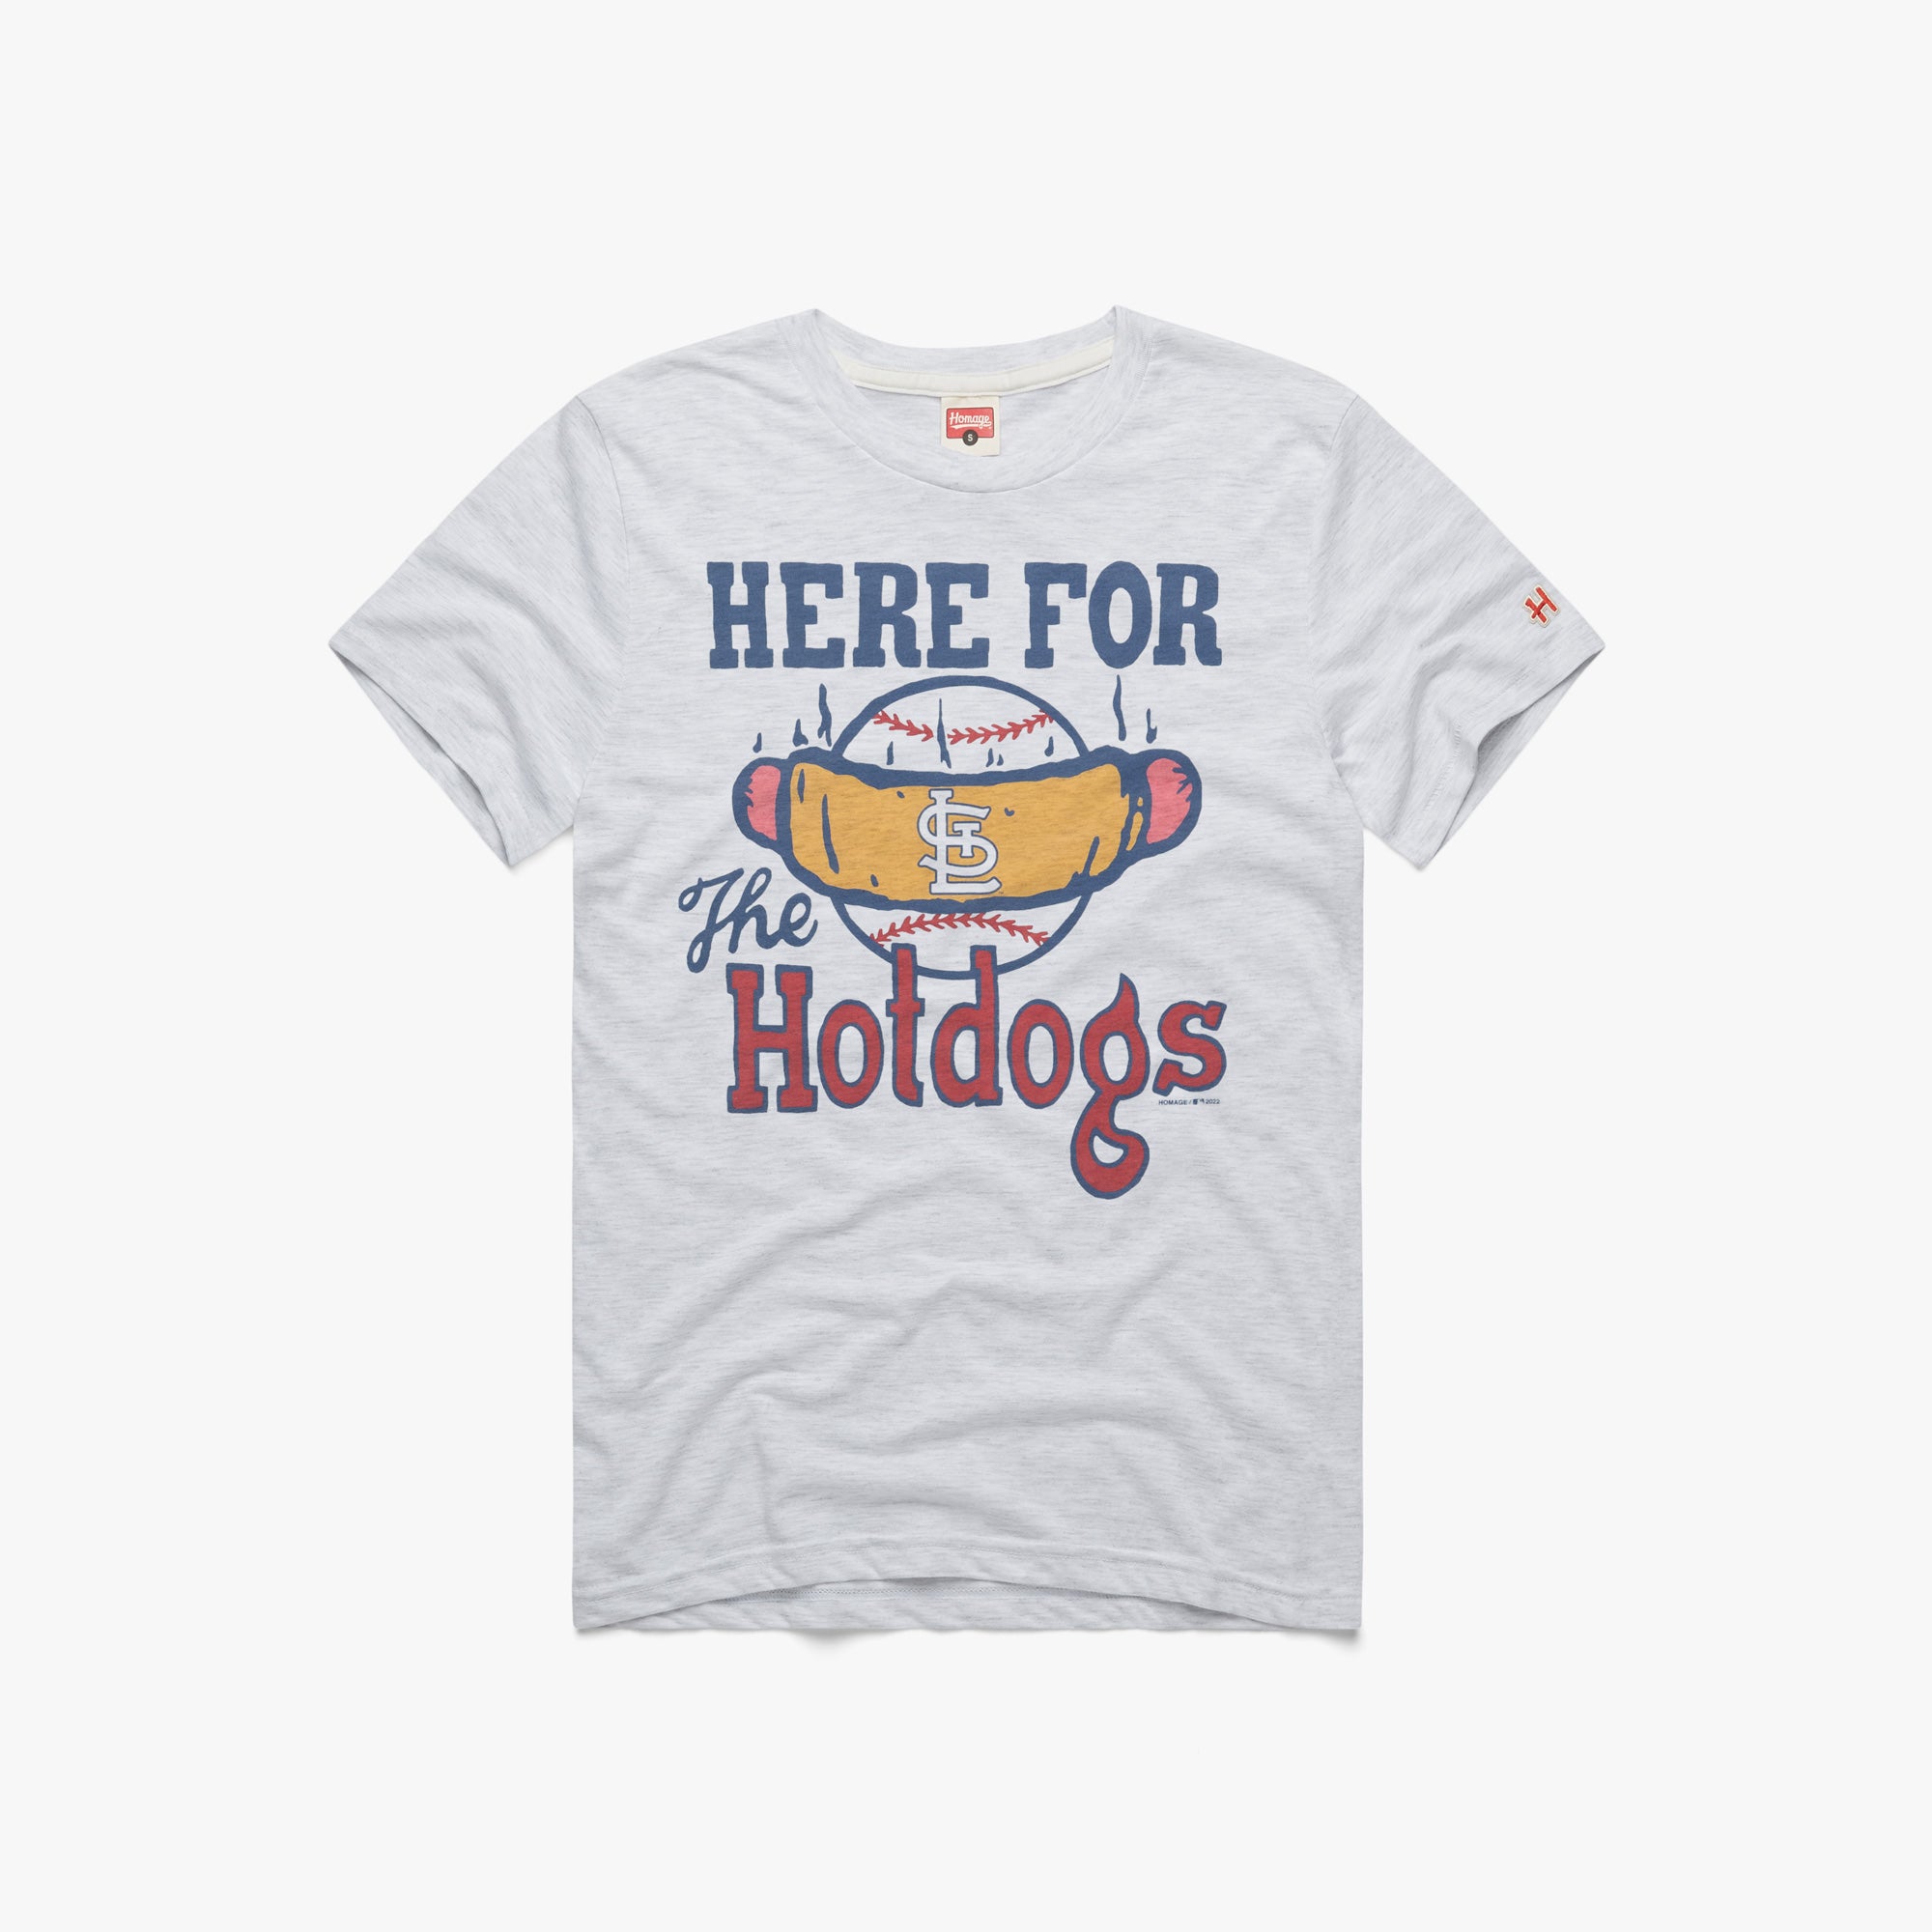 St. Louis Cardinals Jersey Logo T-Shirt from Homage. | Red | Vintage Apparel from Homage.